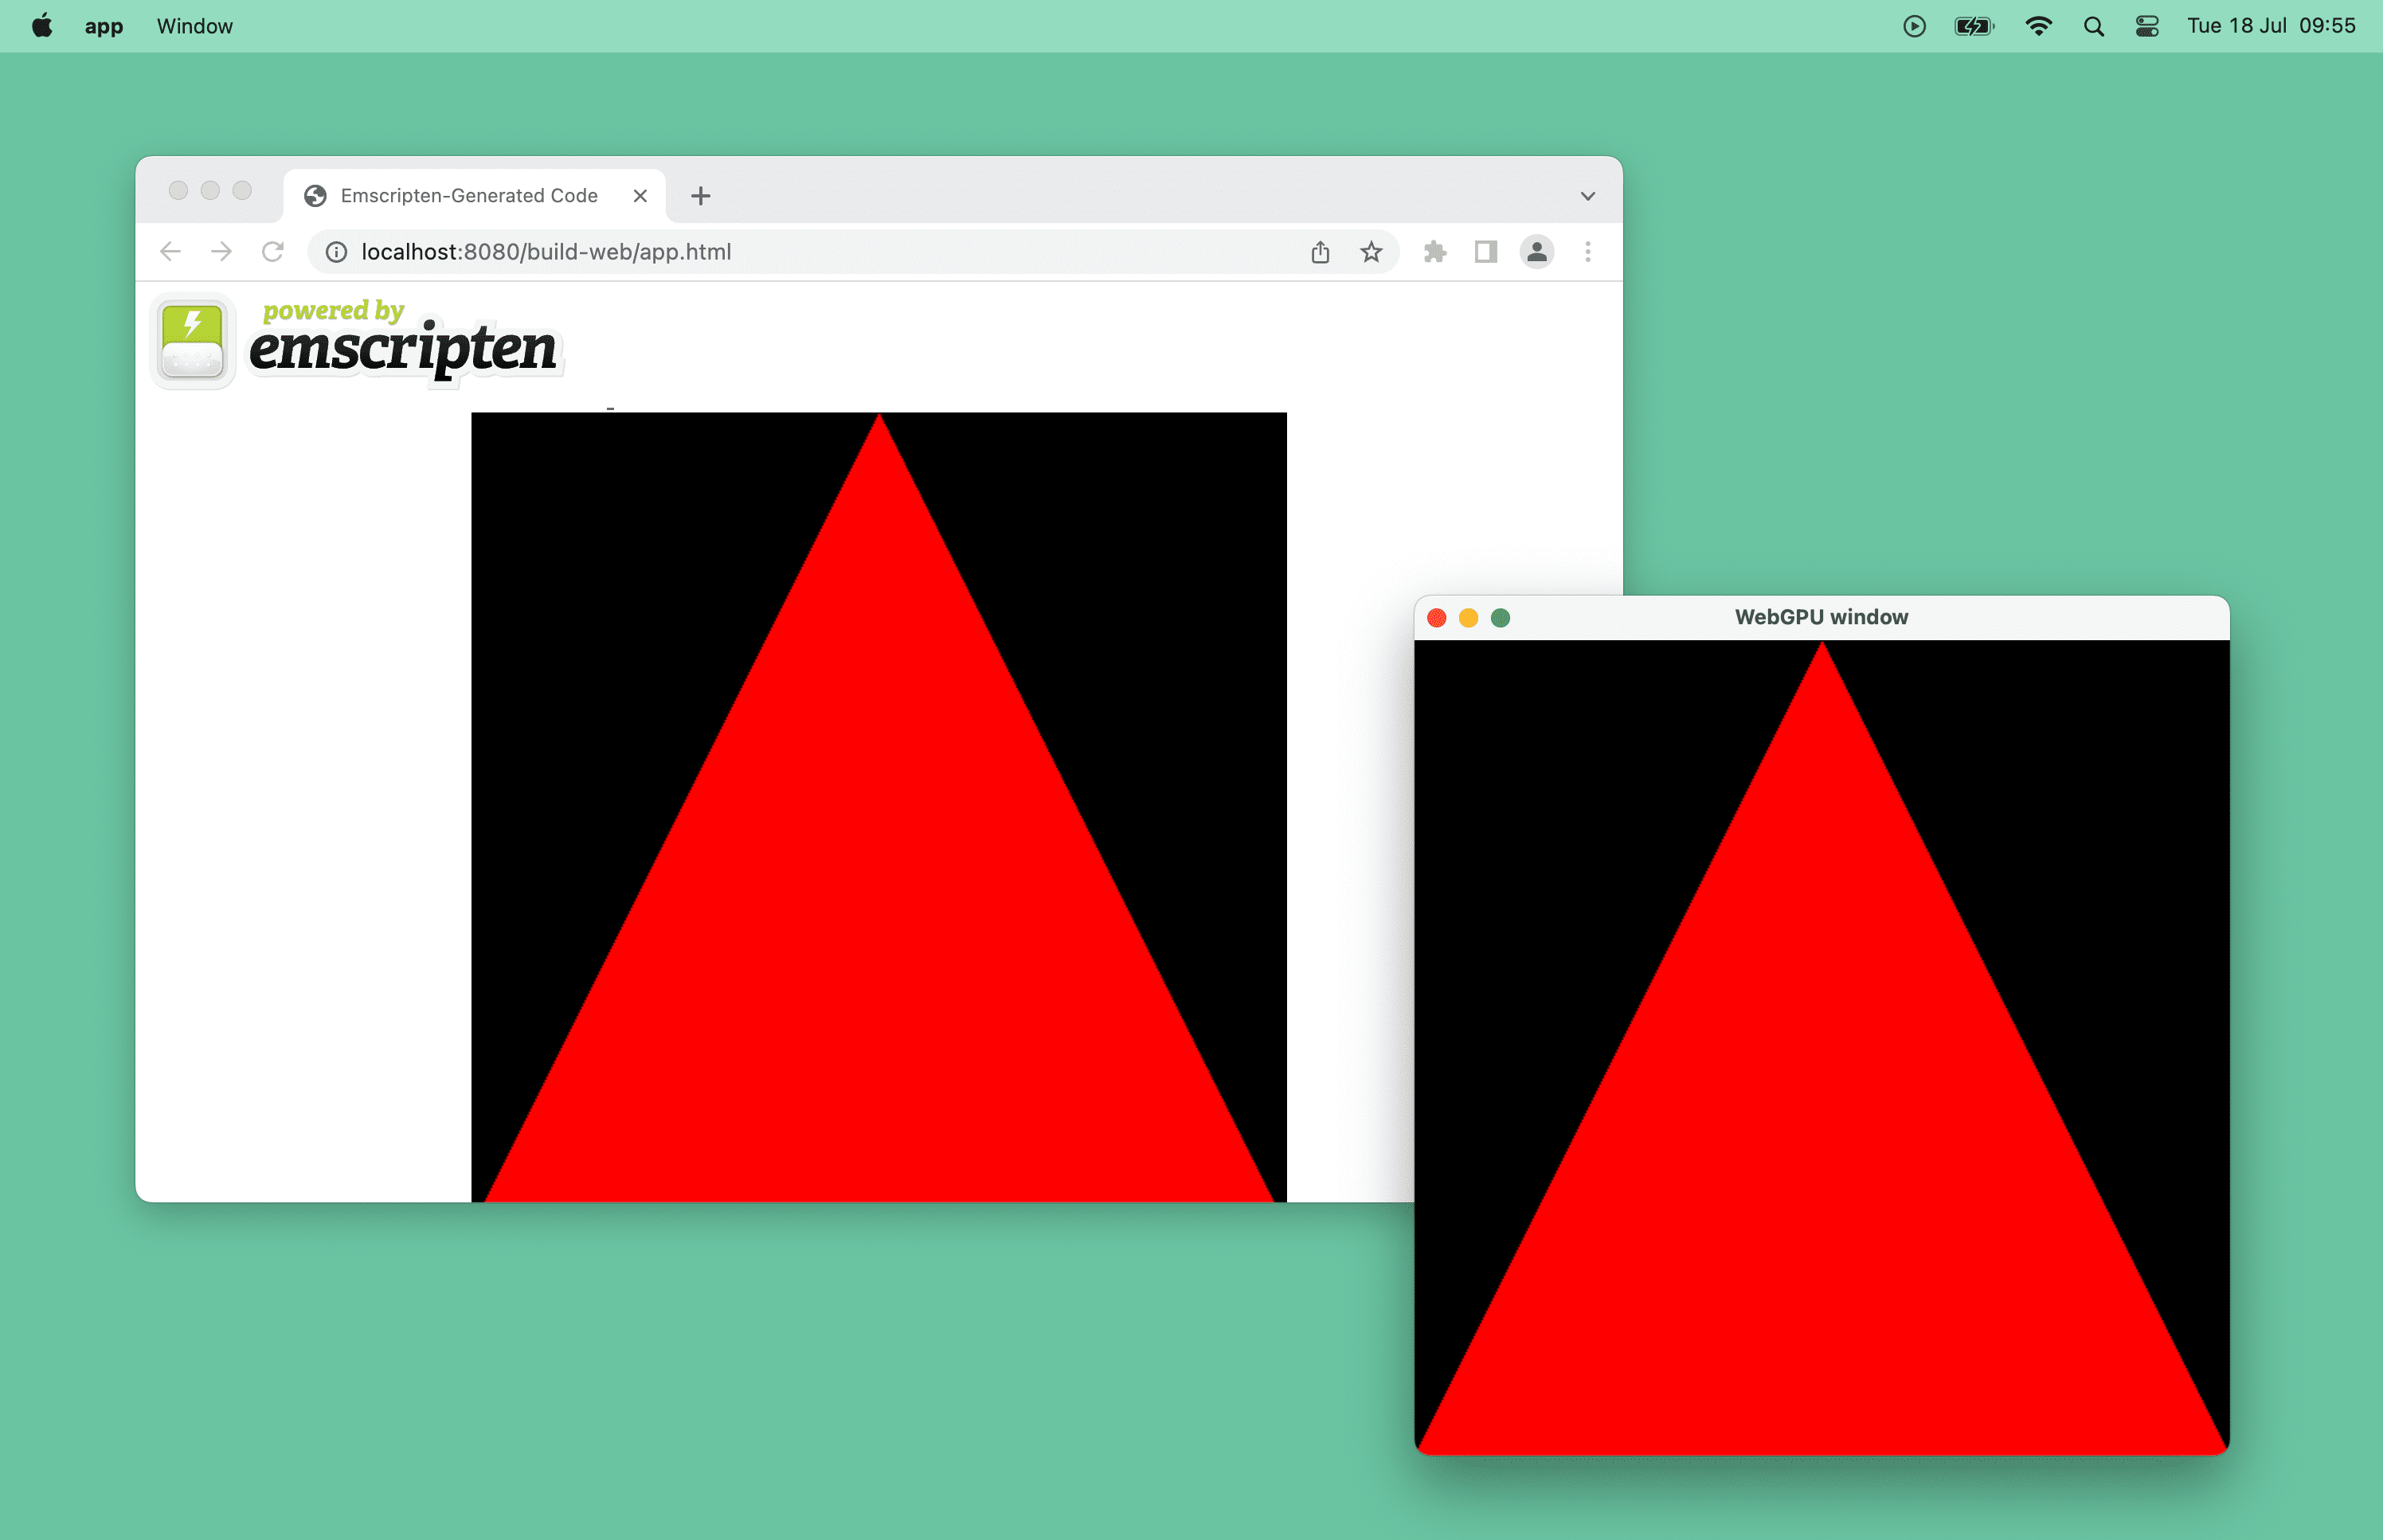 Screenshot of a red triangle powered by WebGPU in a browser window and a desktop window on macOS.